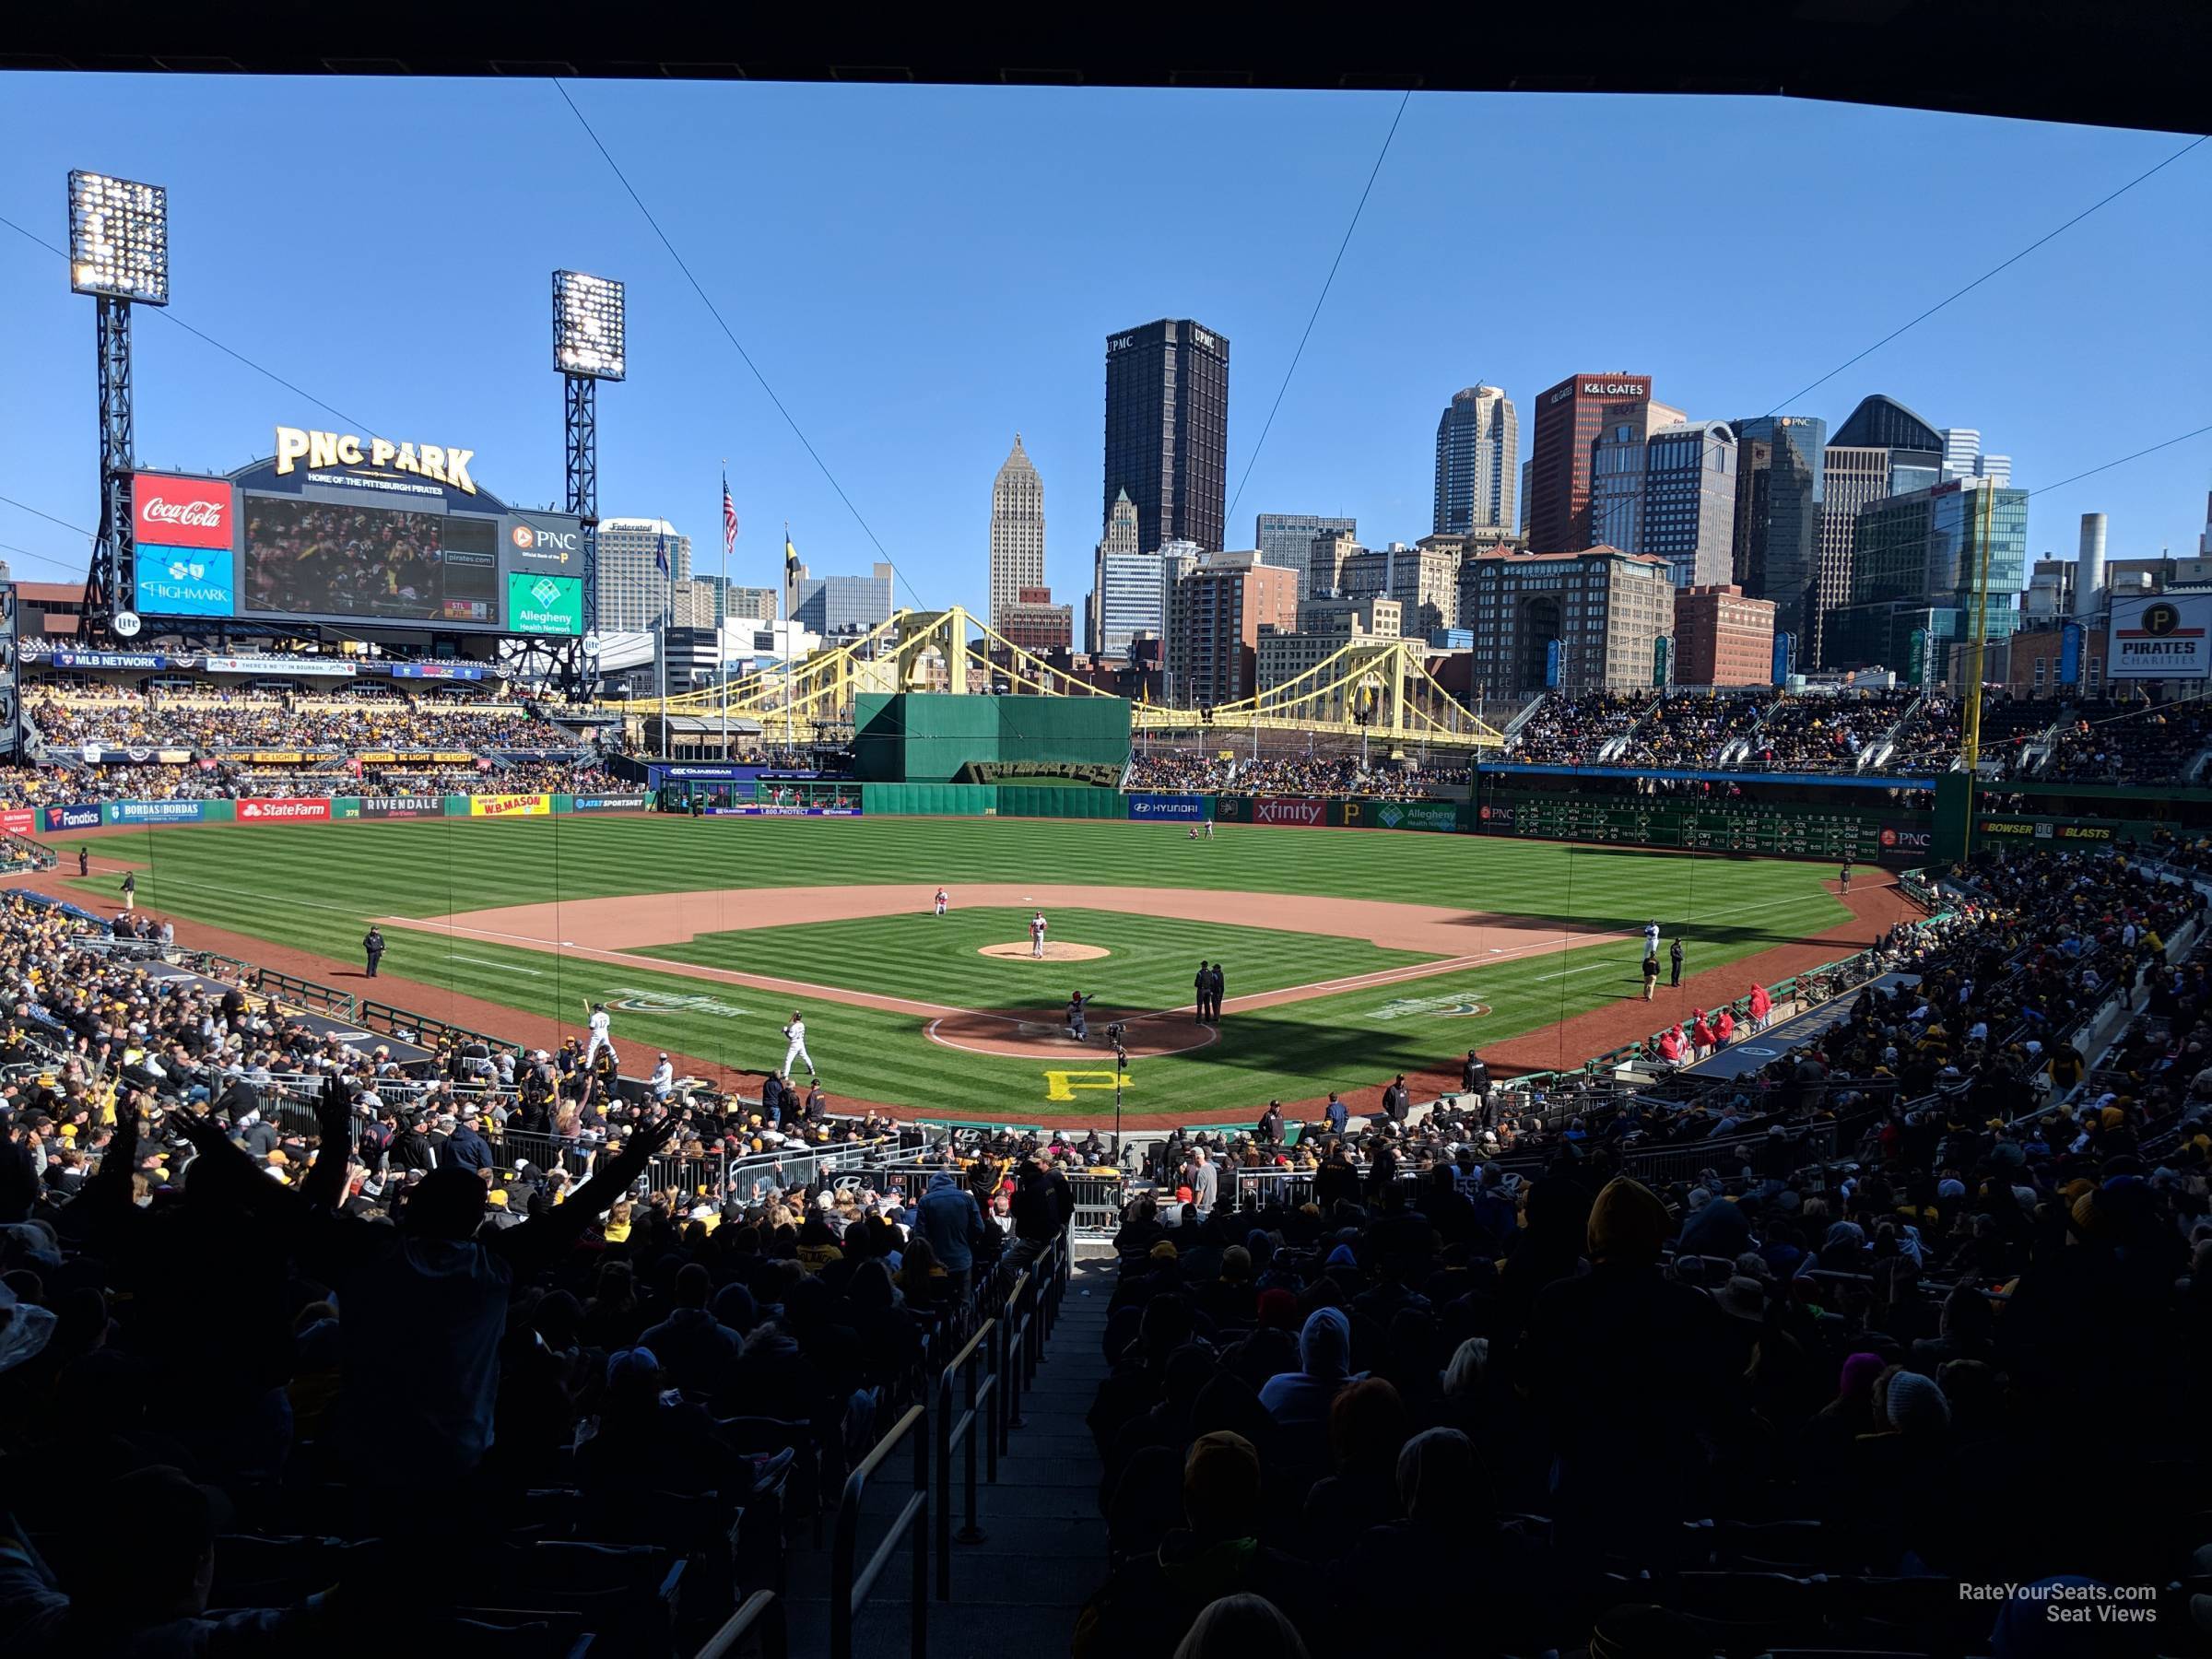 Pnc Park Seating Chart Rows Matttroy